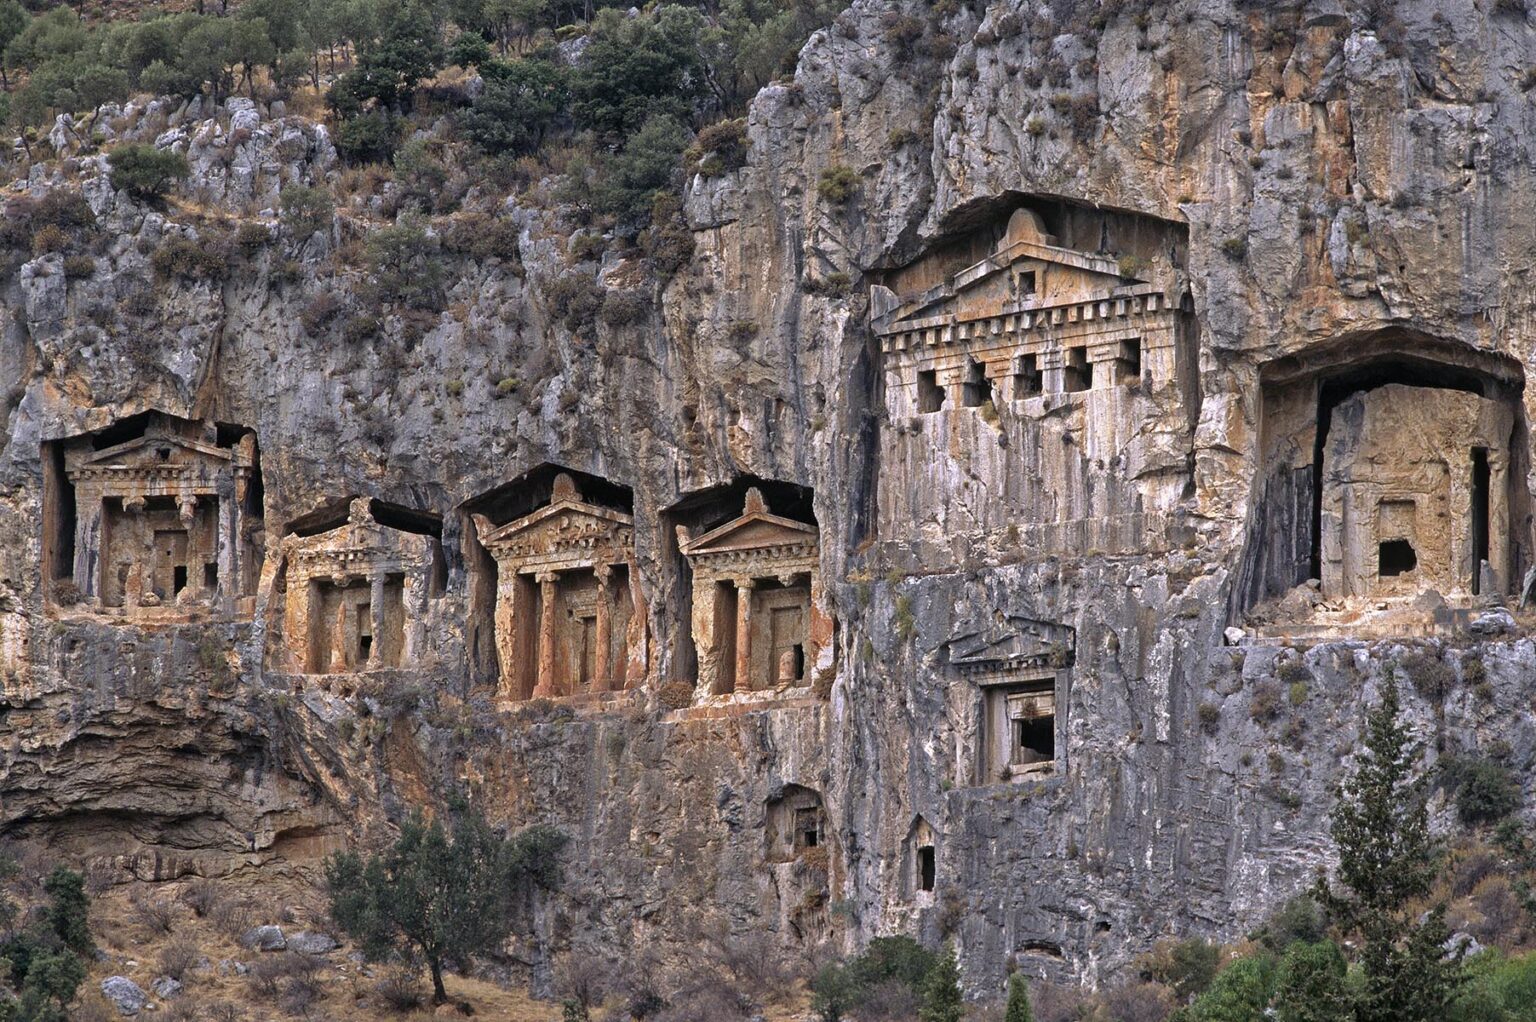 The ancient tombs carved into cliffs near The Ruins of CAUNUS (400 BC onwards) - TURQUOISE COAST, TURKEY